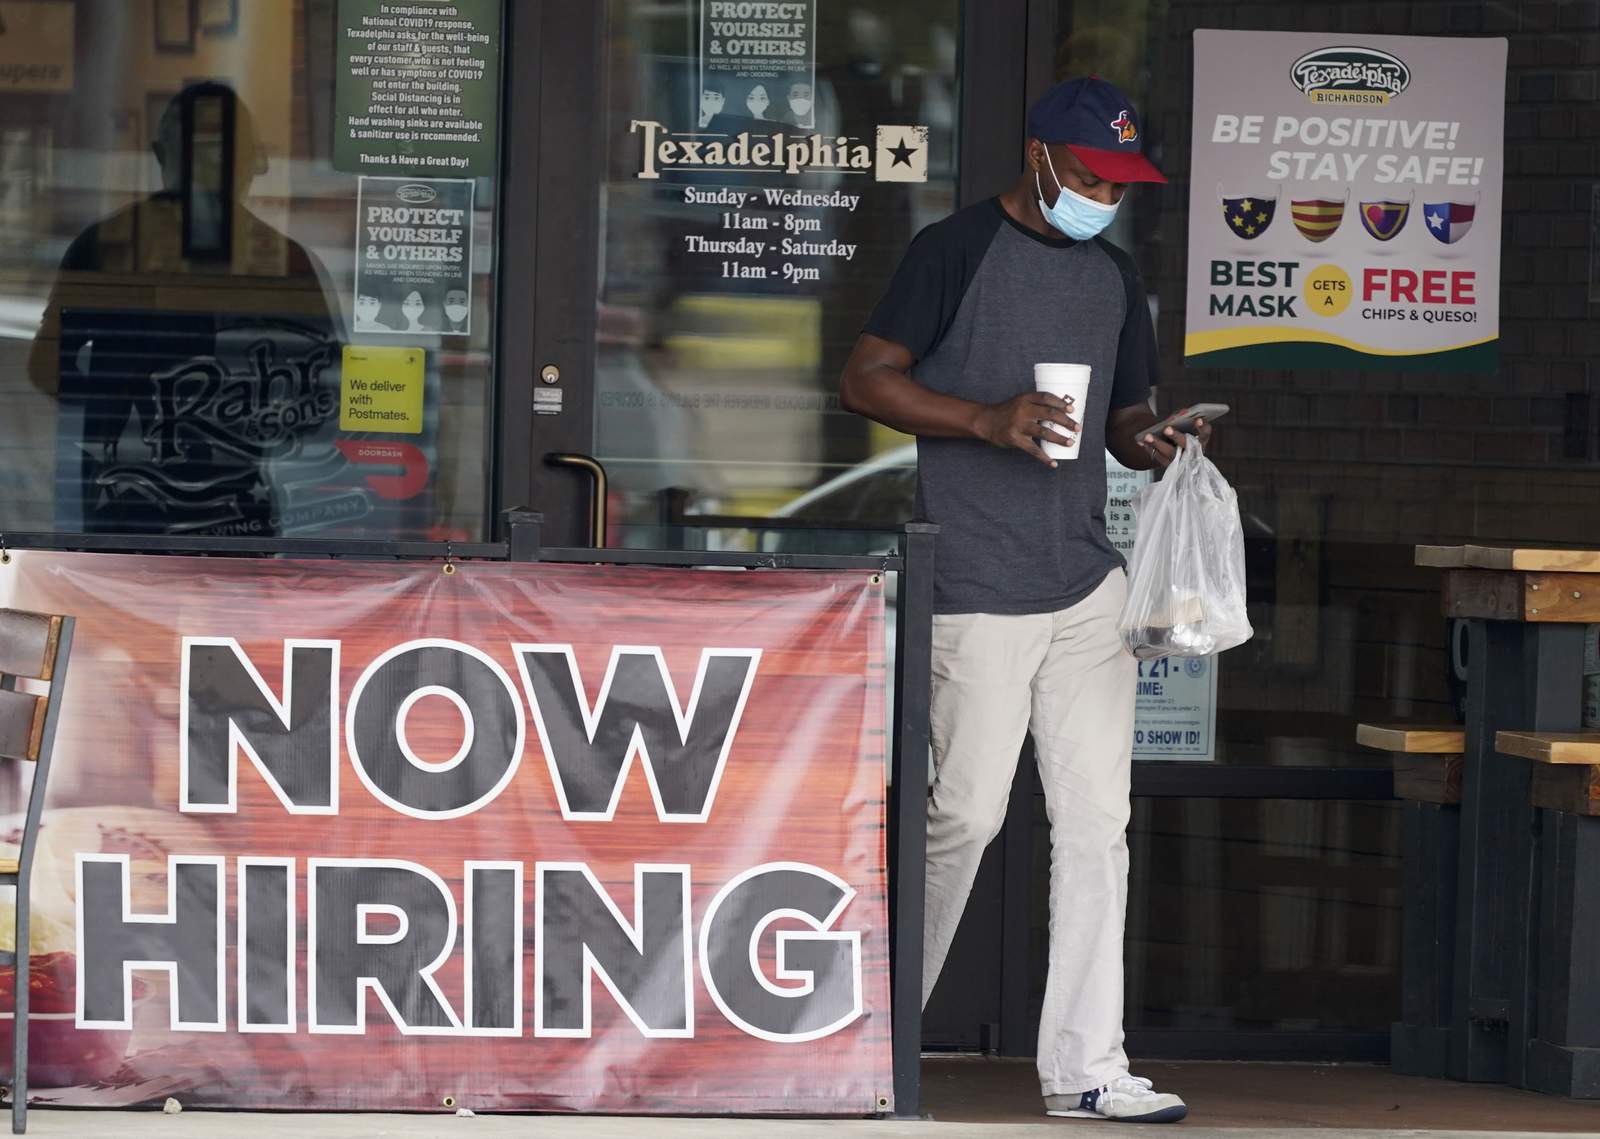 Many more likely sought jobless aid as layoffs remain high